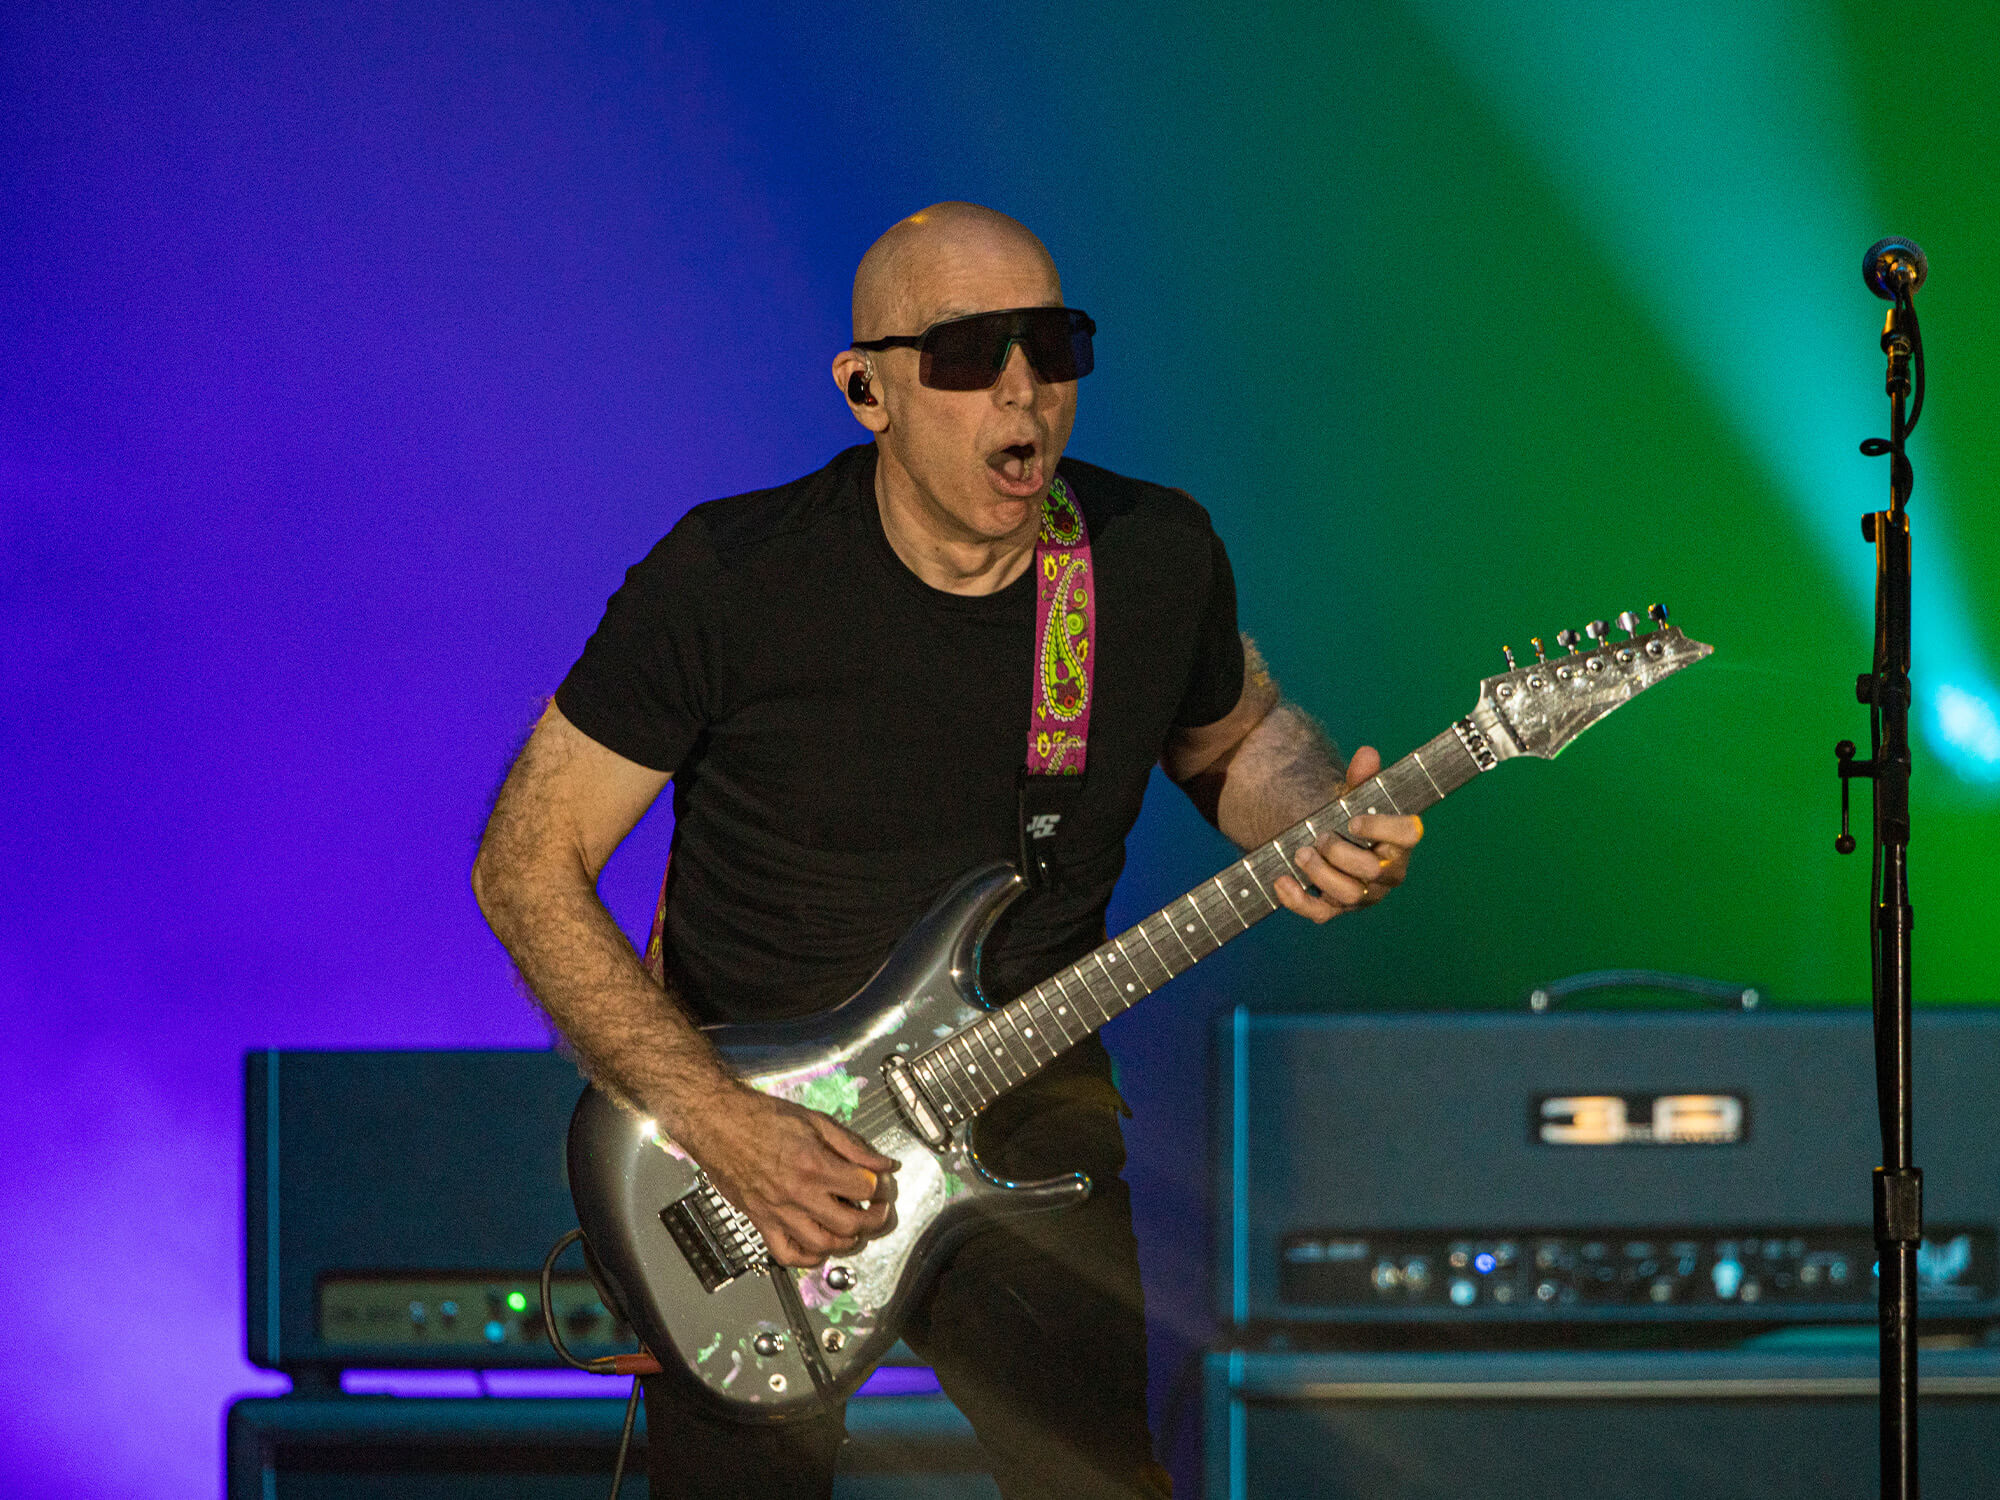 Joe Satriani playing guitar on stage. He is wearing his famed shades and has a shocked expression on his face.